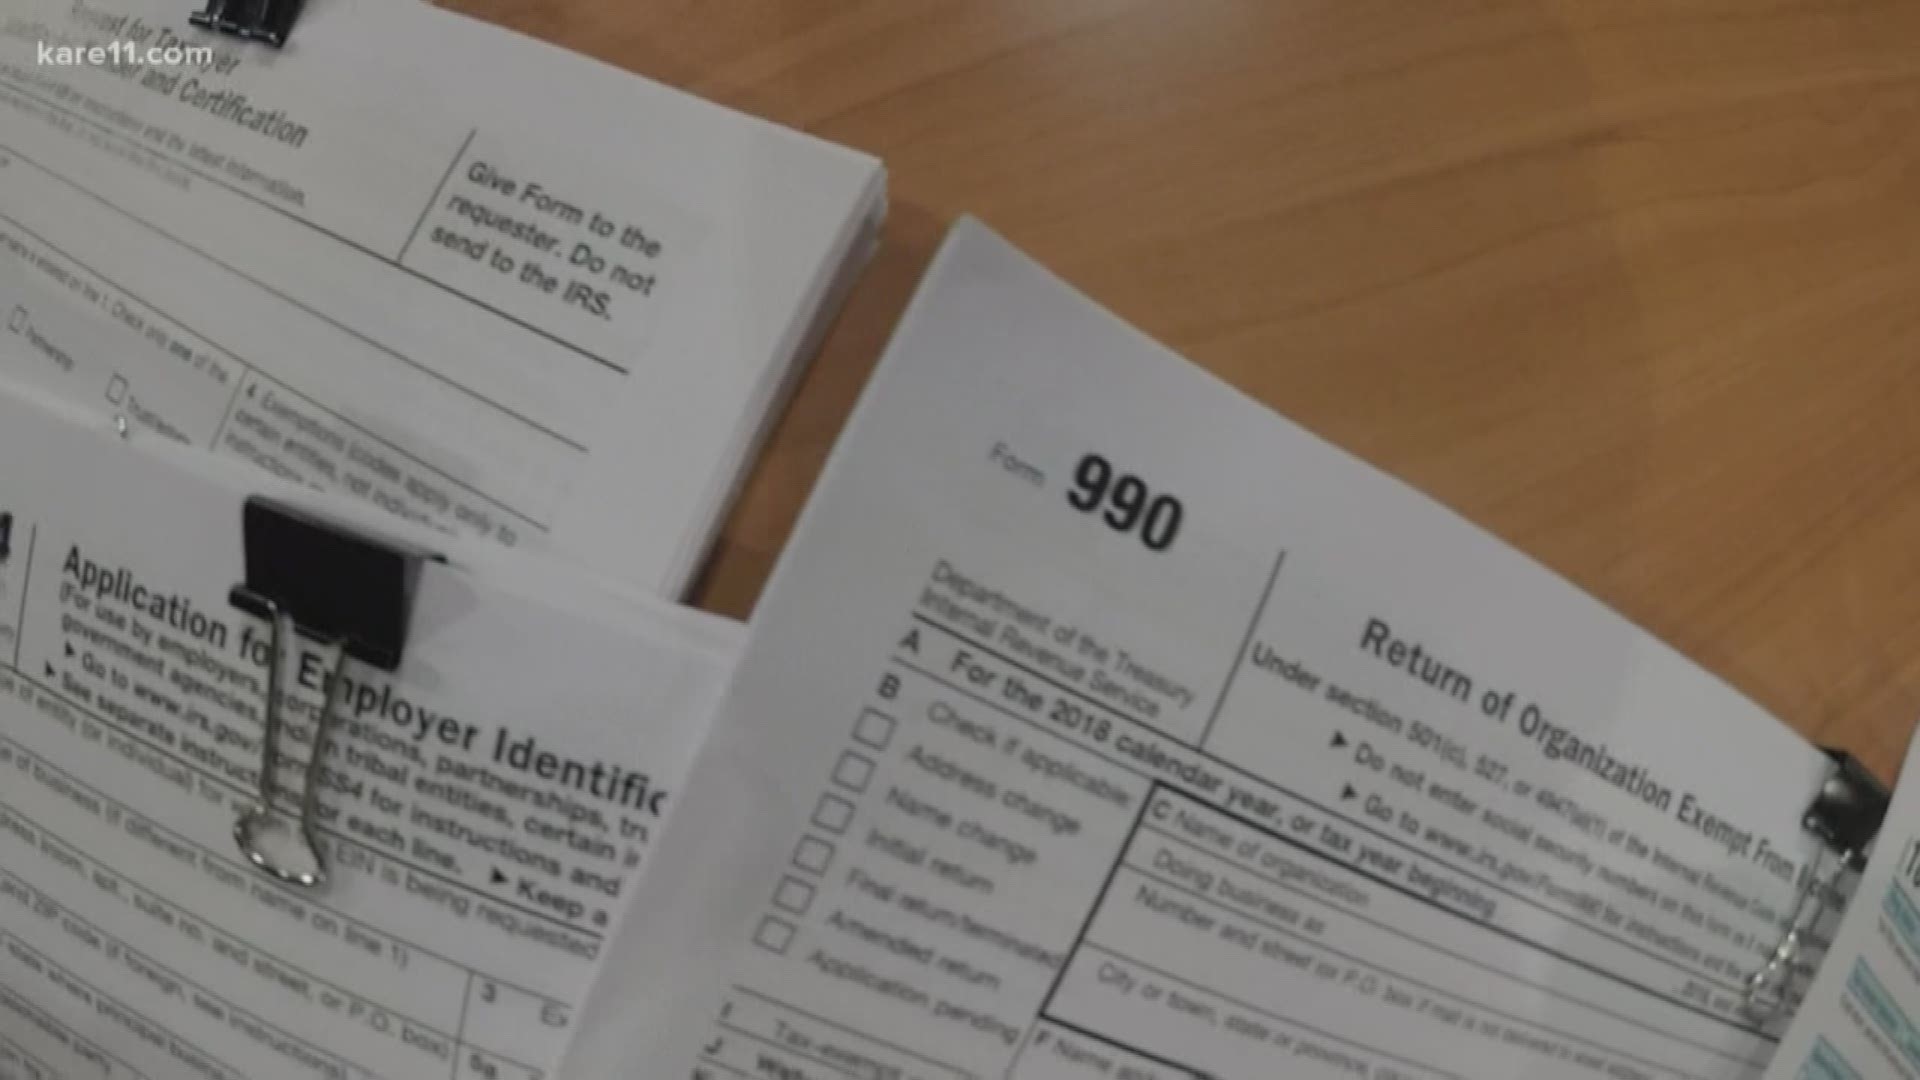 Local financial expert shares several to help make late tax filing easier.